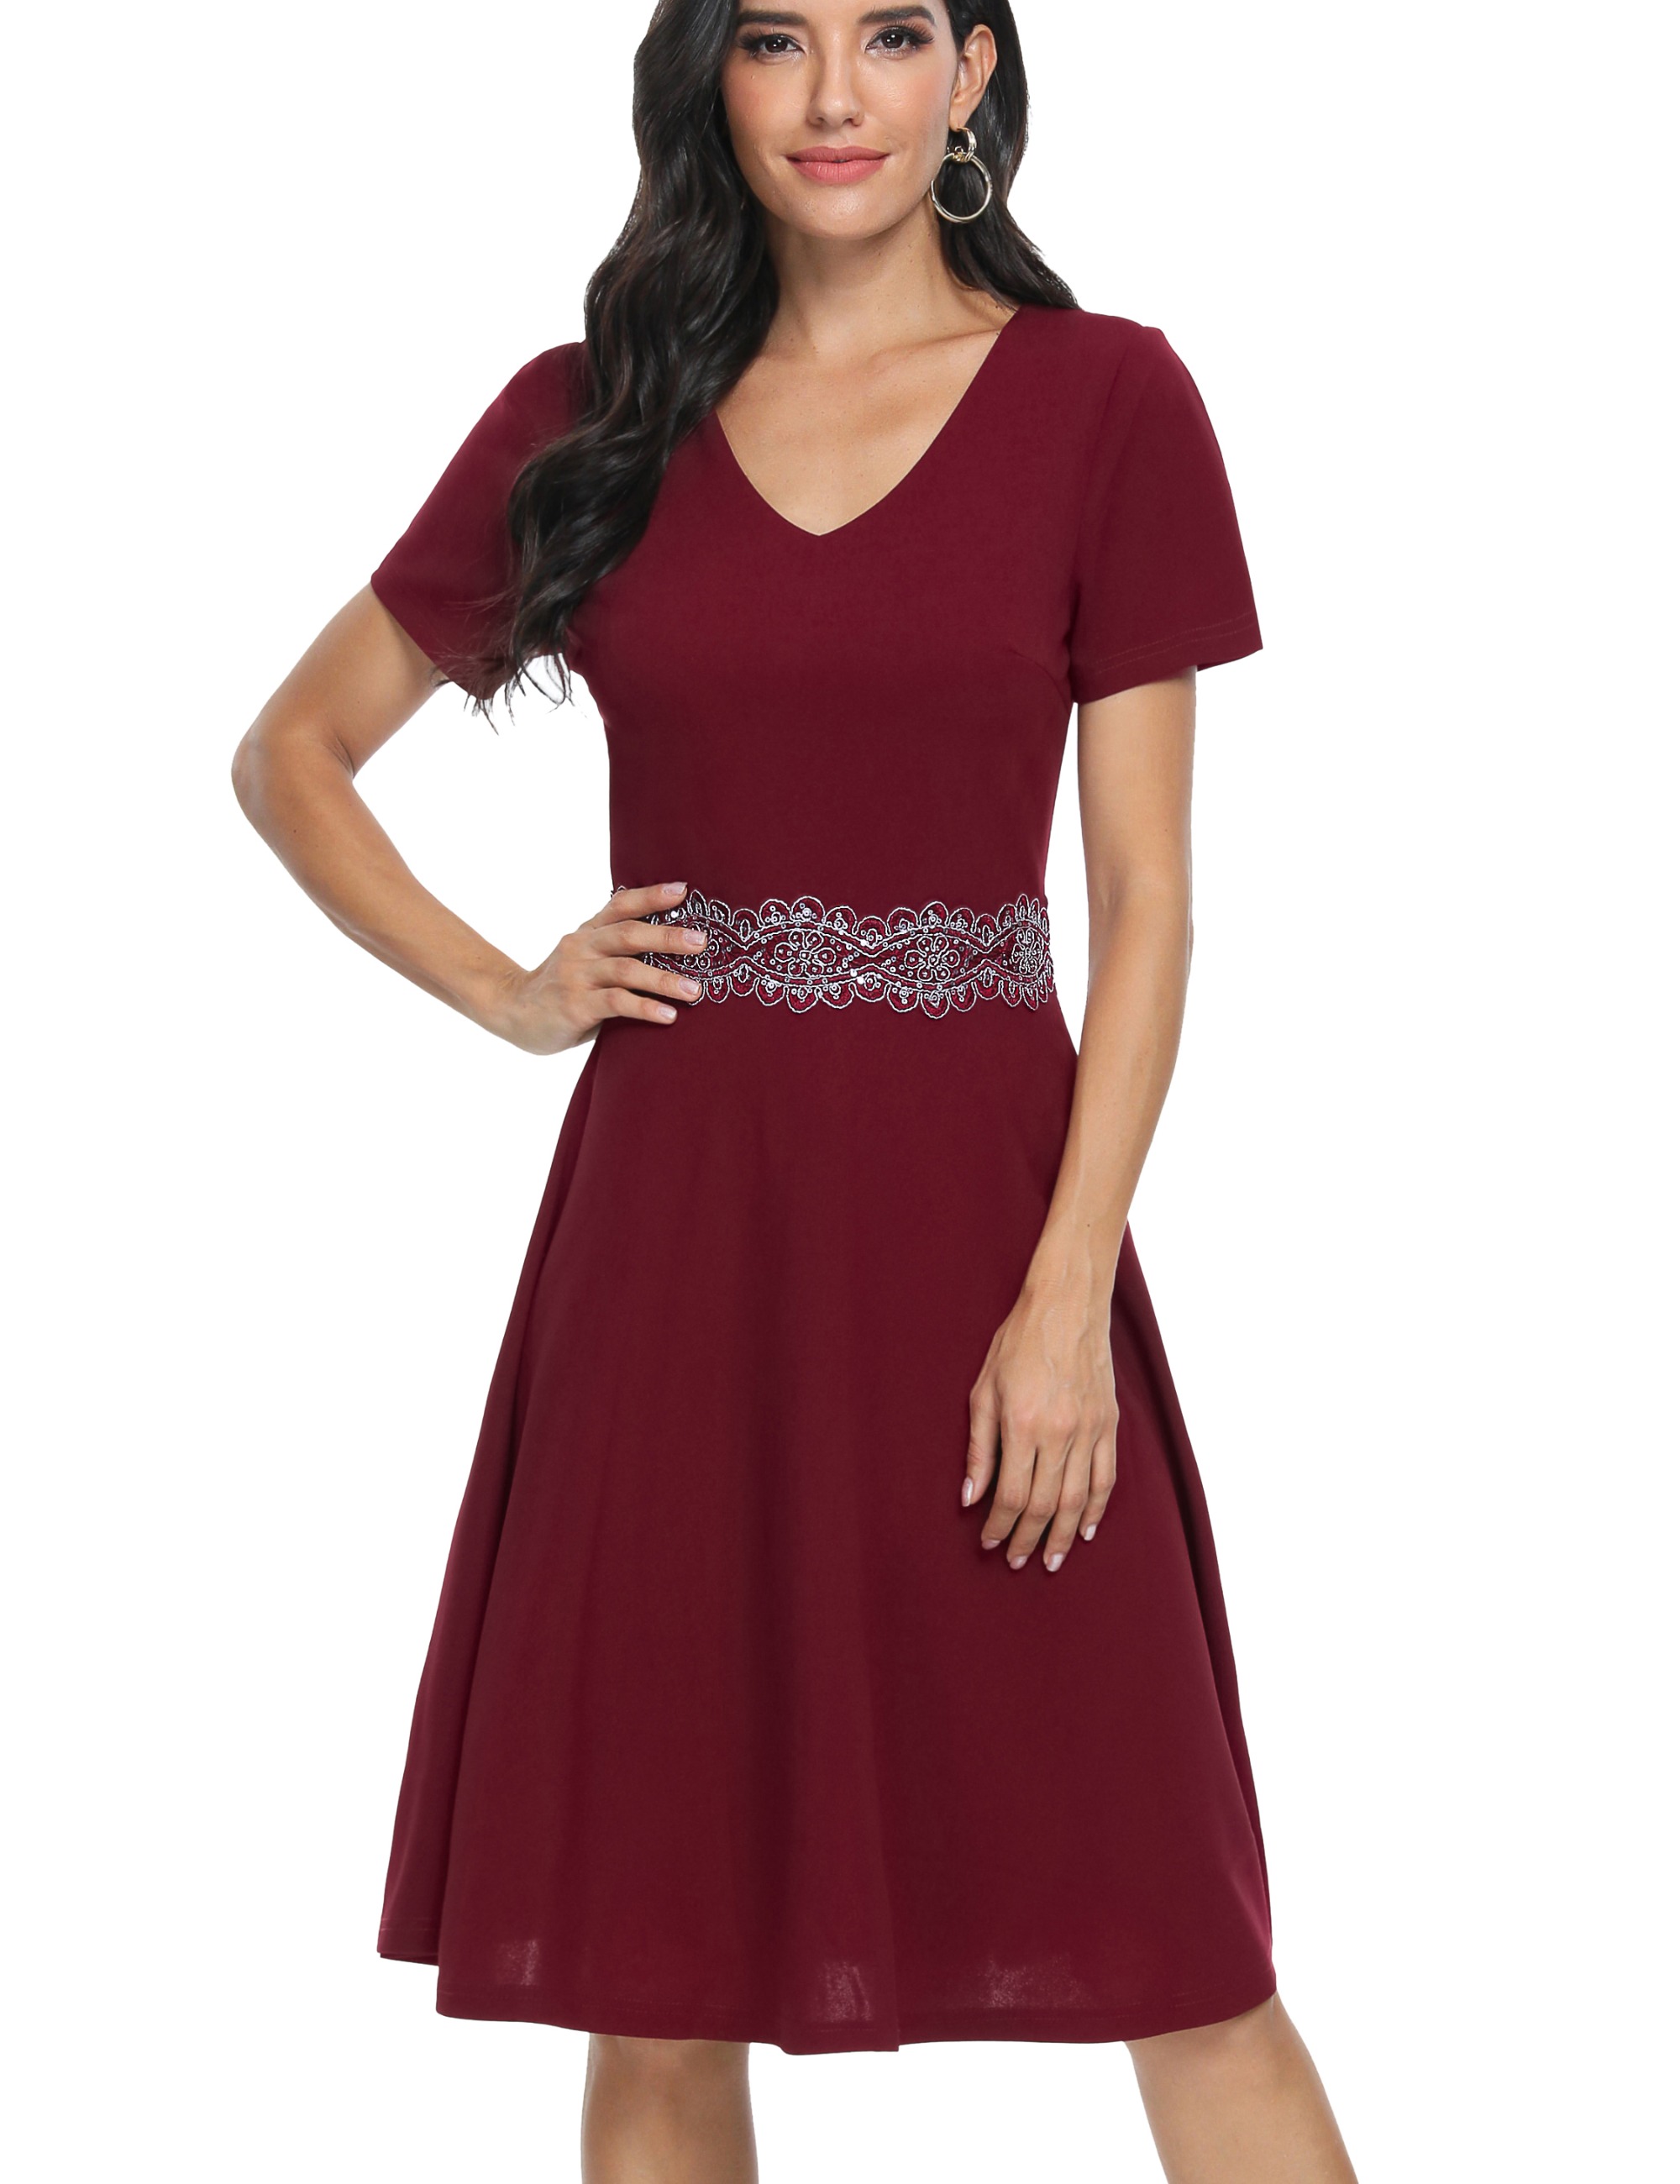 Women's V Neck Short Sleeve Cocktail Party Prom Wedding Guest A Line Dress